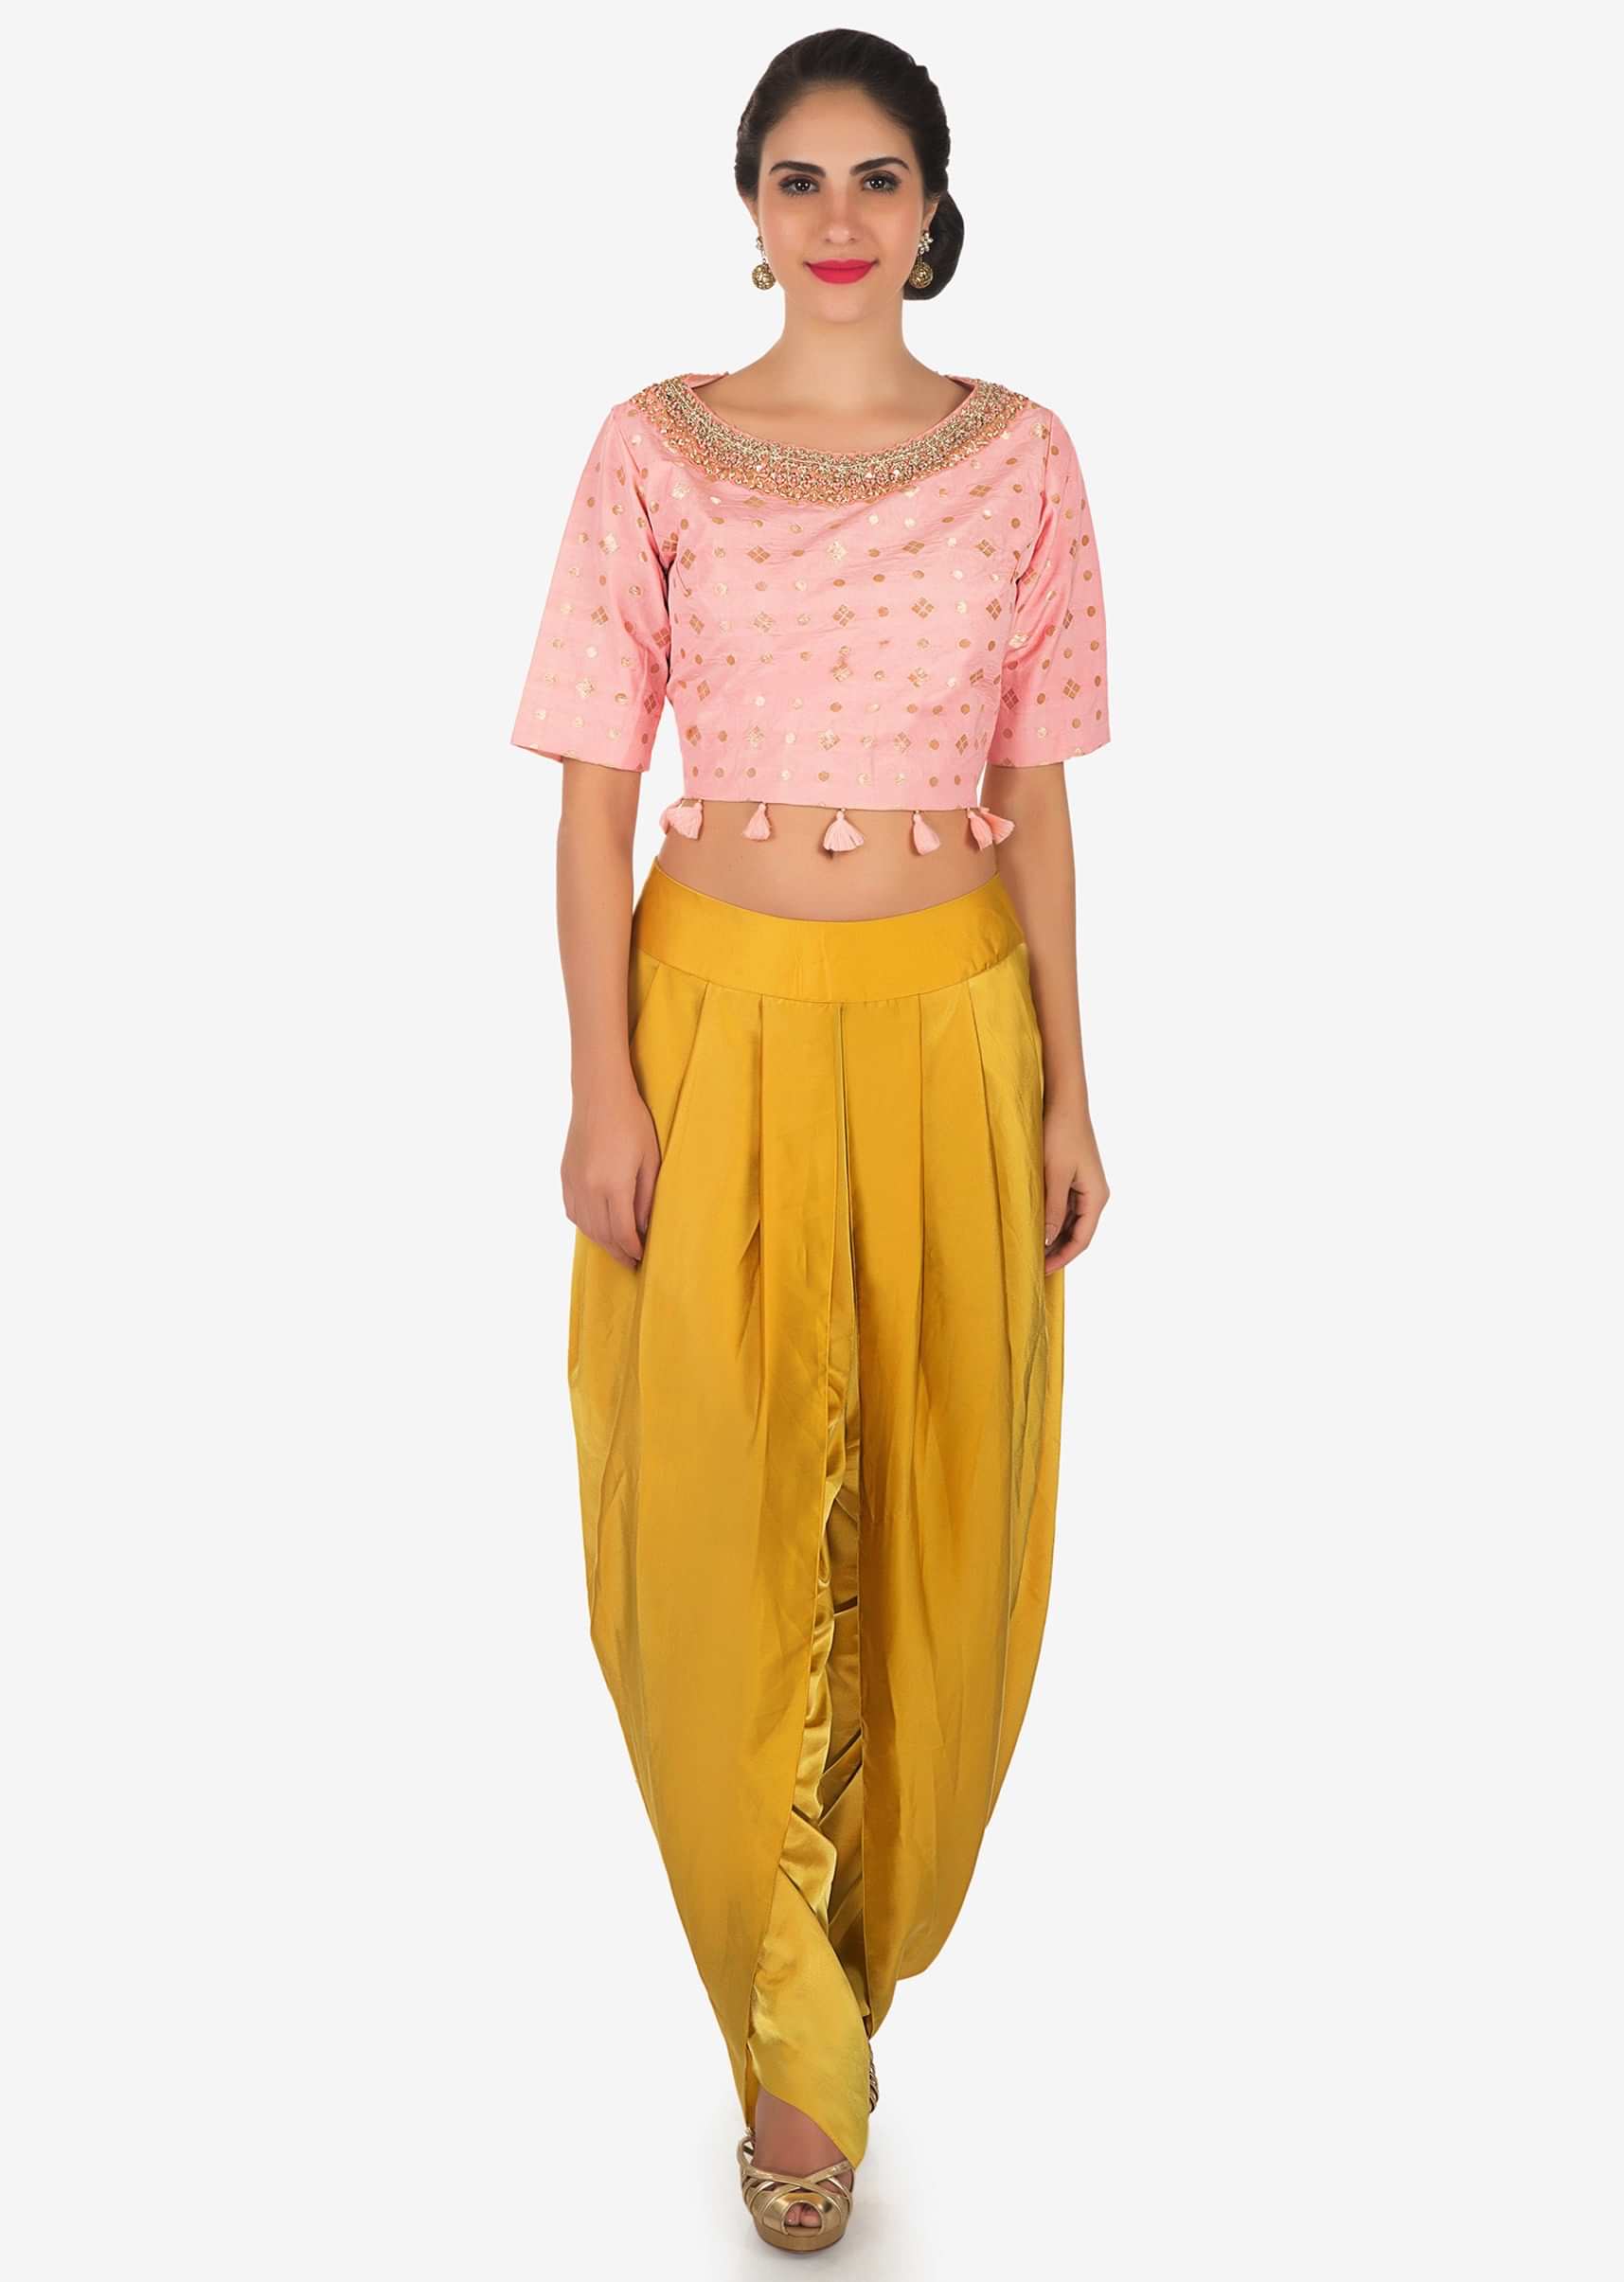 Pink crop top and yellow dhoti suit  in moti sequin work only on Kalki